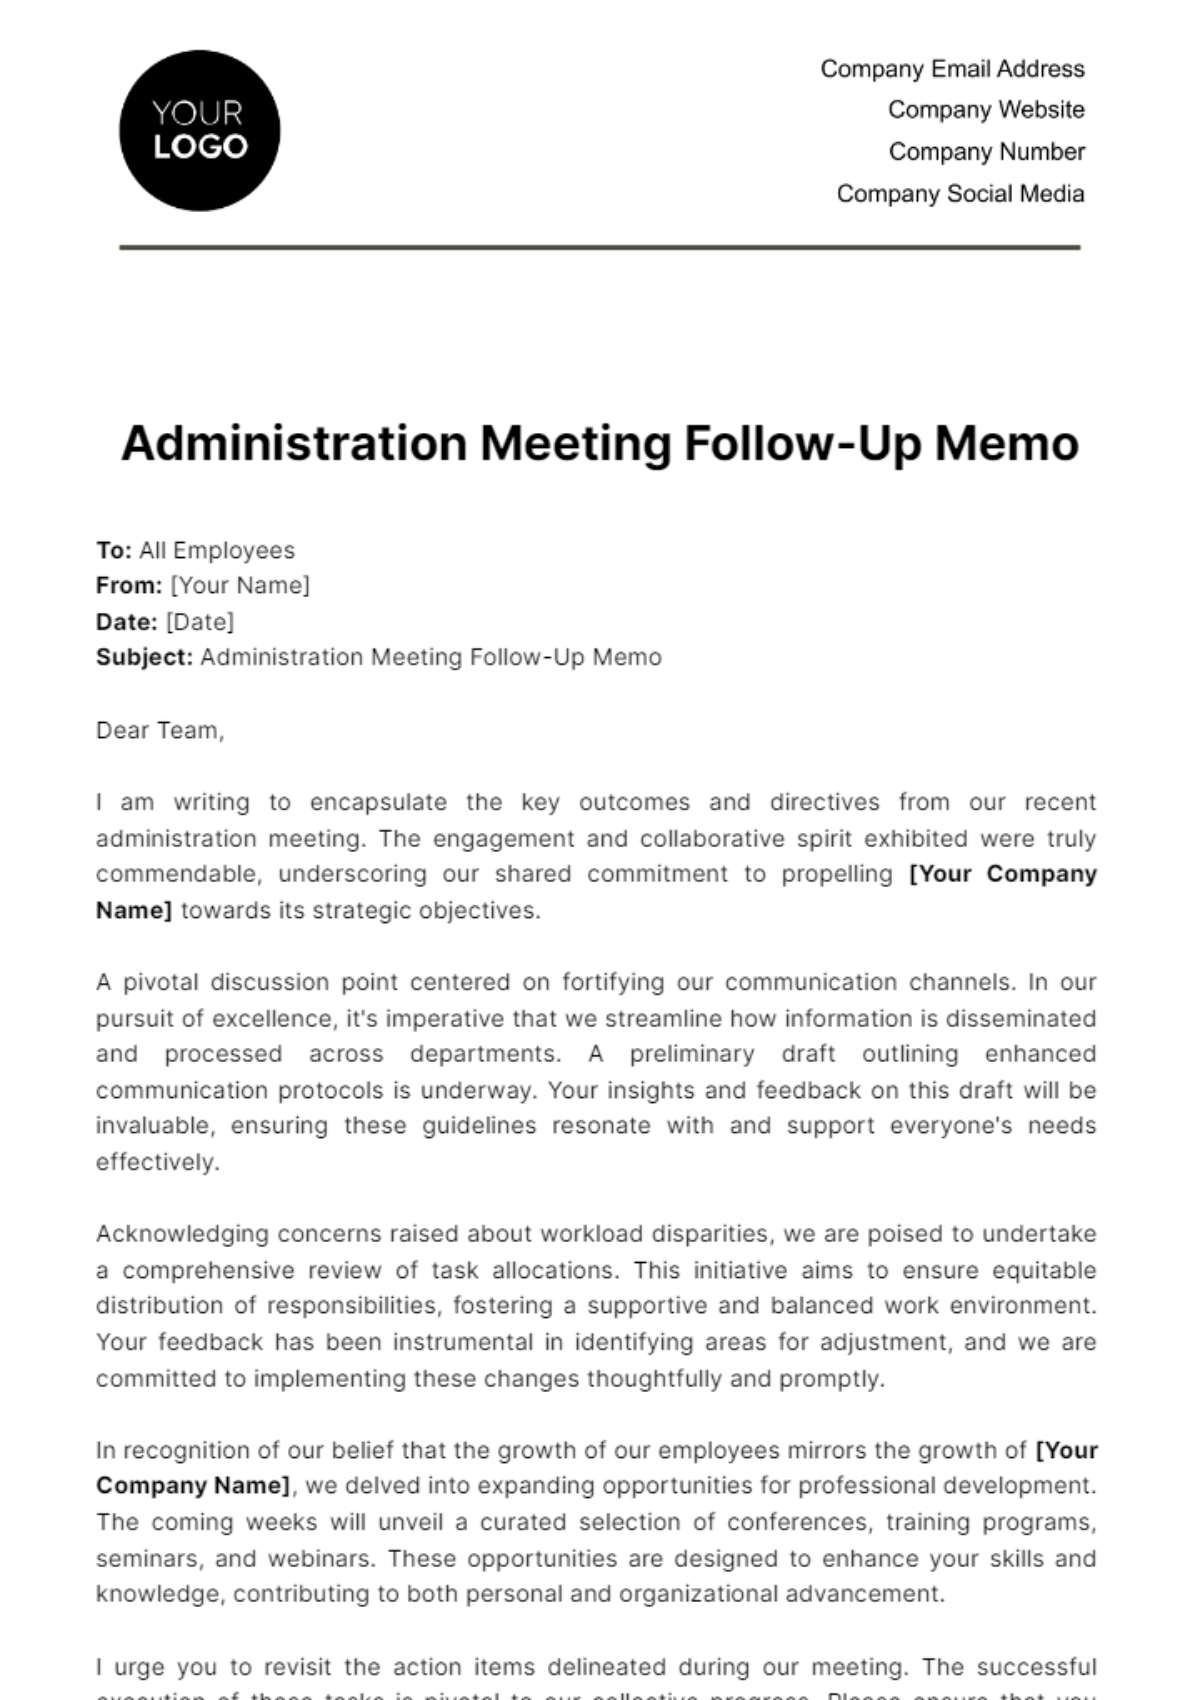 Administration Meeting Follow-Up Memo Template